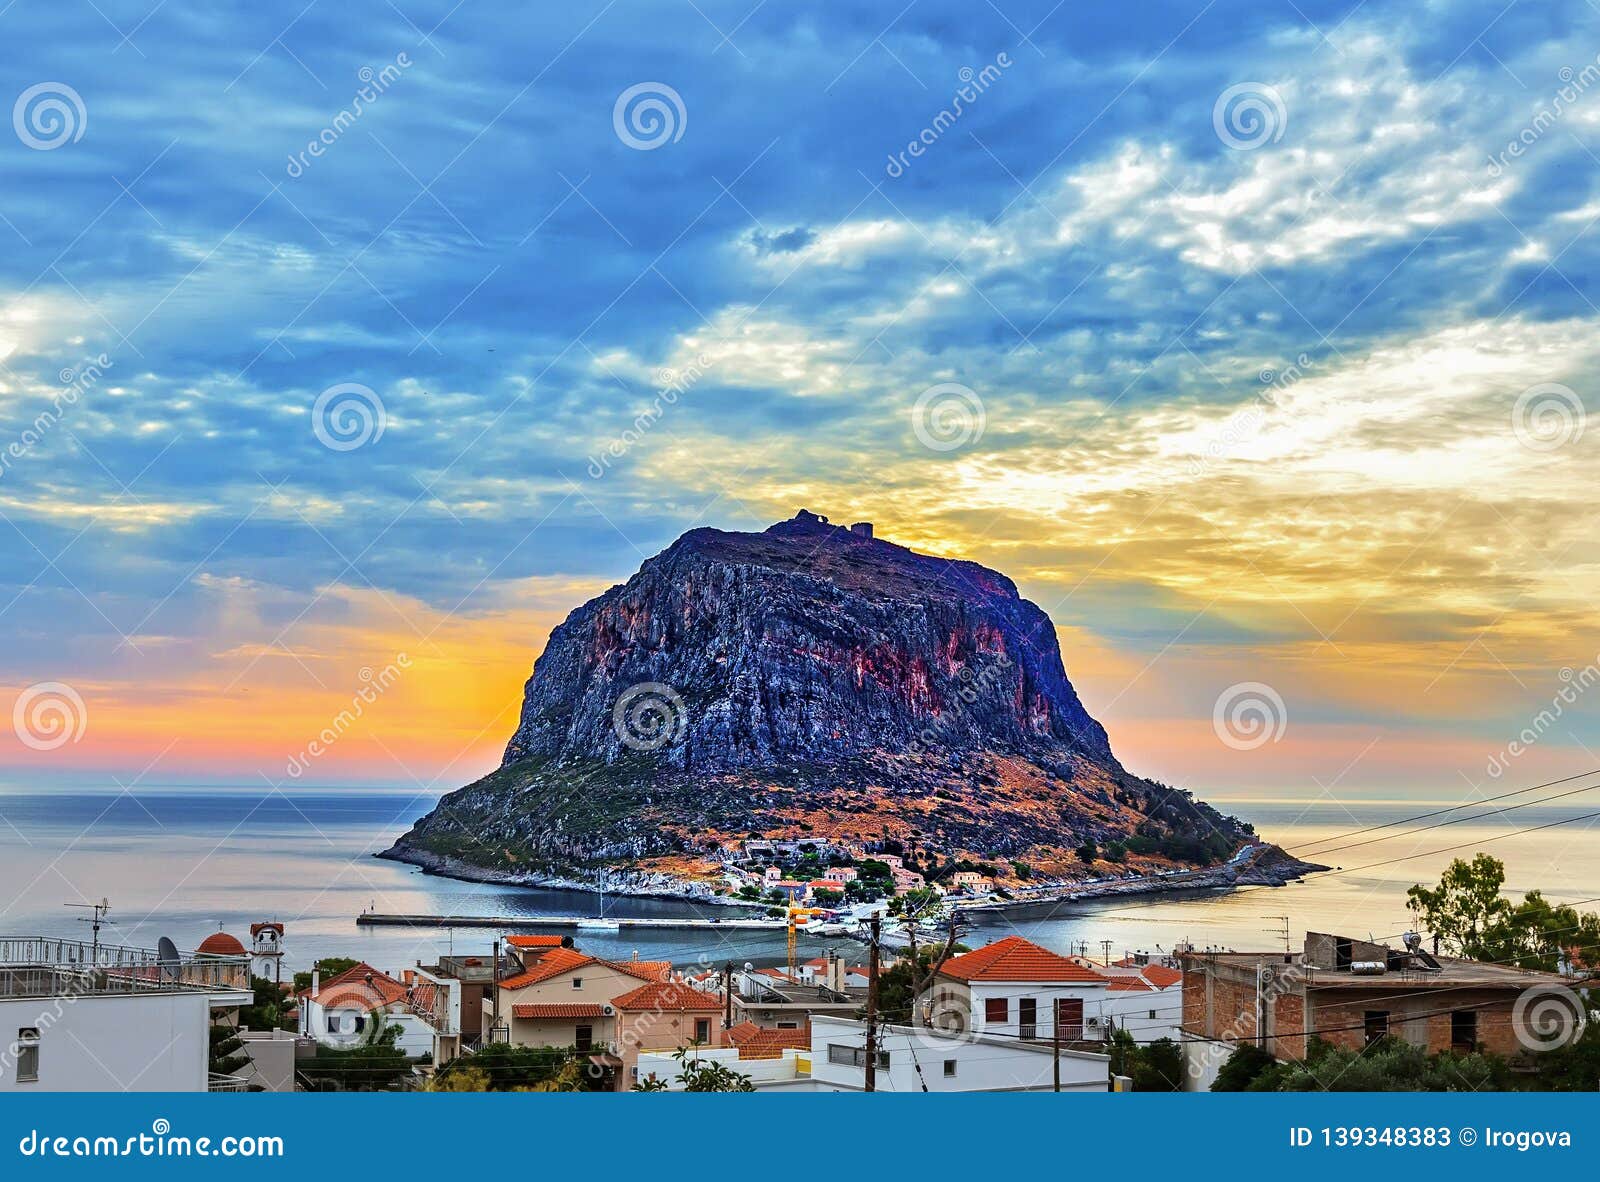 monemvasia is a town and a municipality in laconia